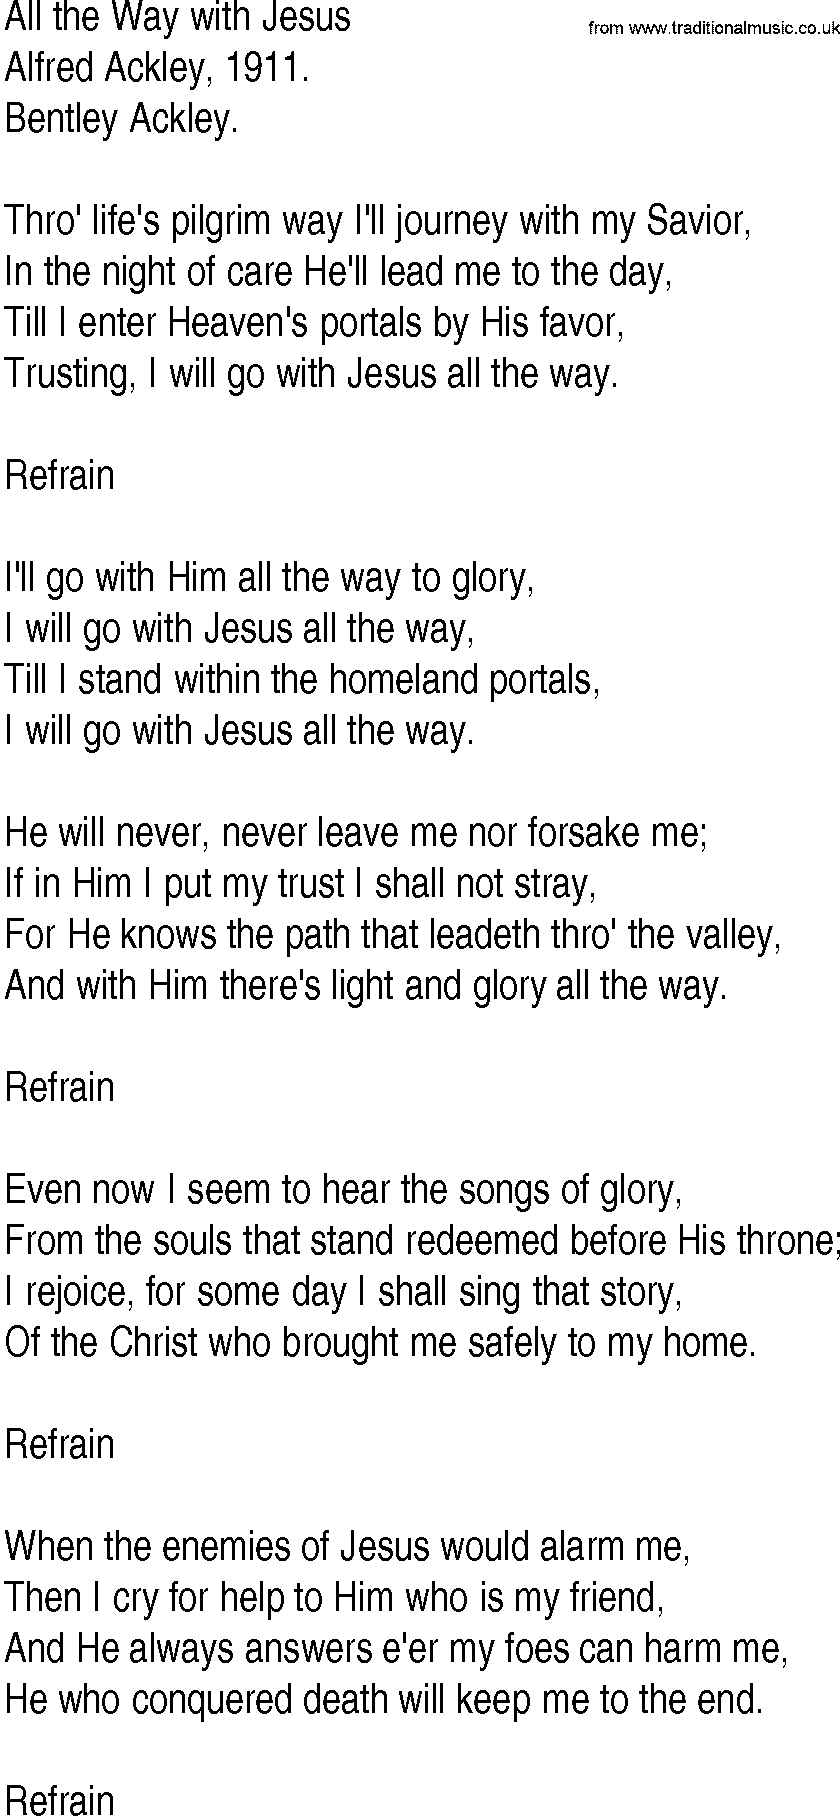 Hymn and Gospel Song: All the Way with Jesus by Alfred Ackley lyrics